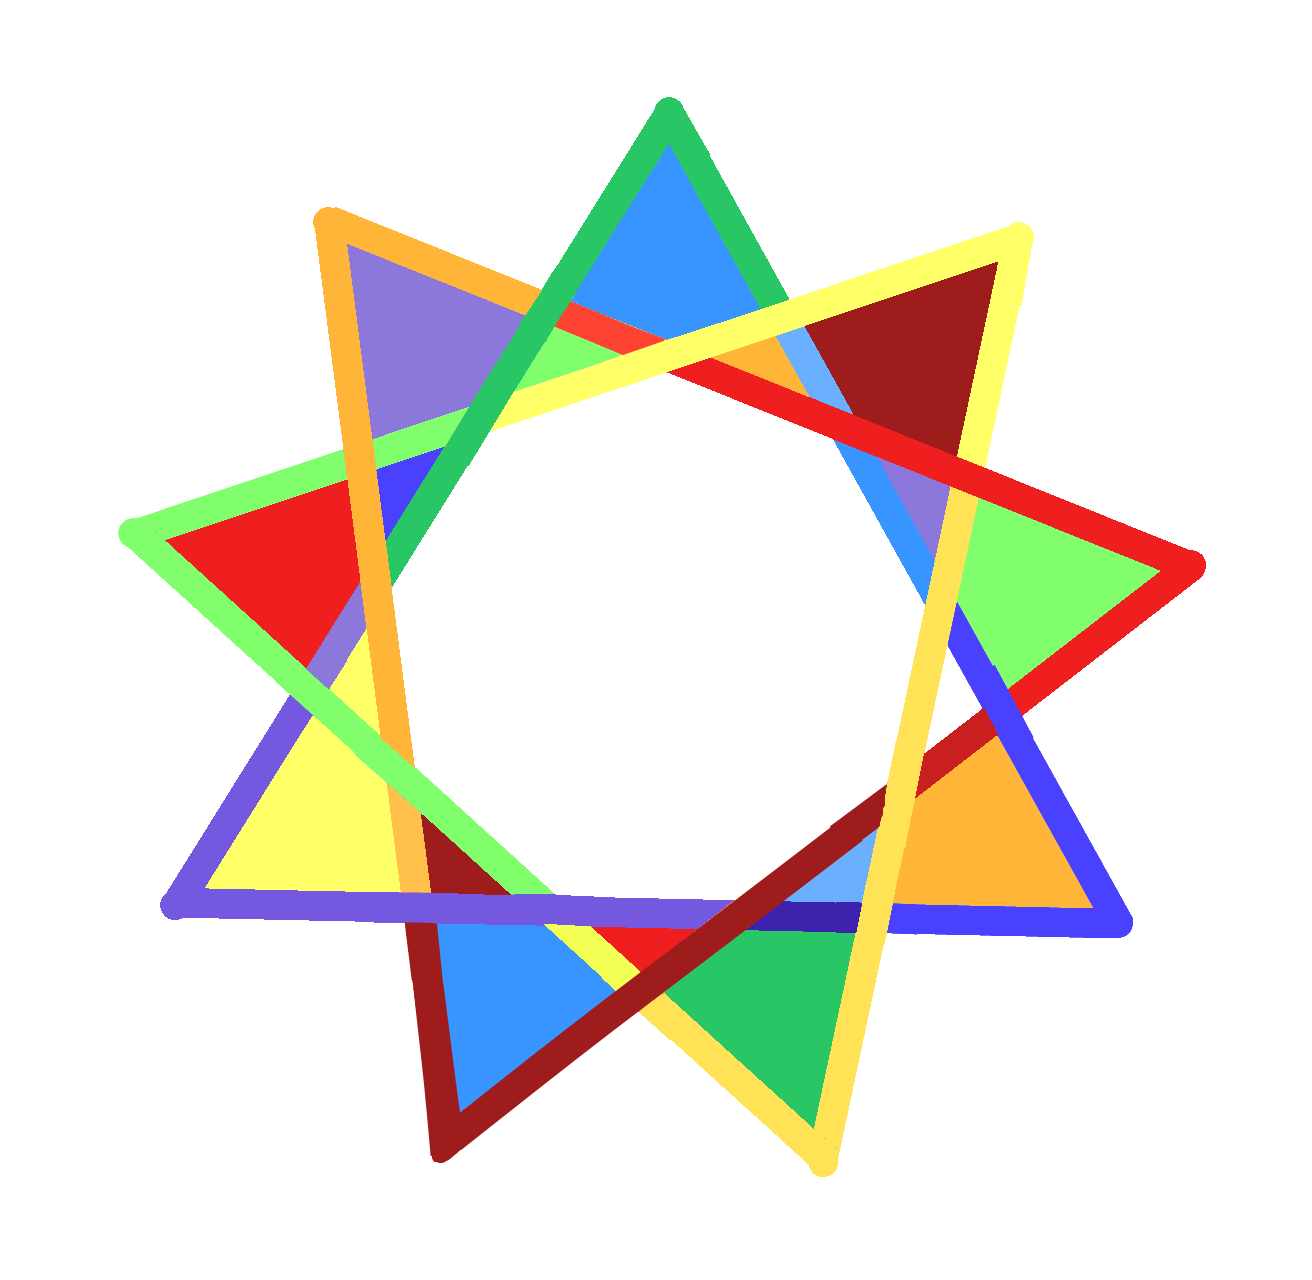 Gallery Of Free Image Of Nine Pointed Stars And Baha'i Clip Art